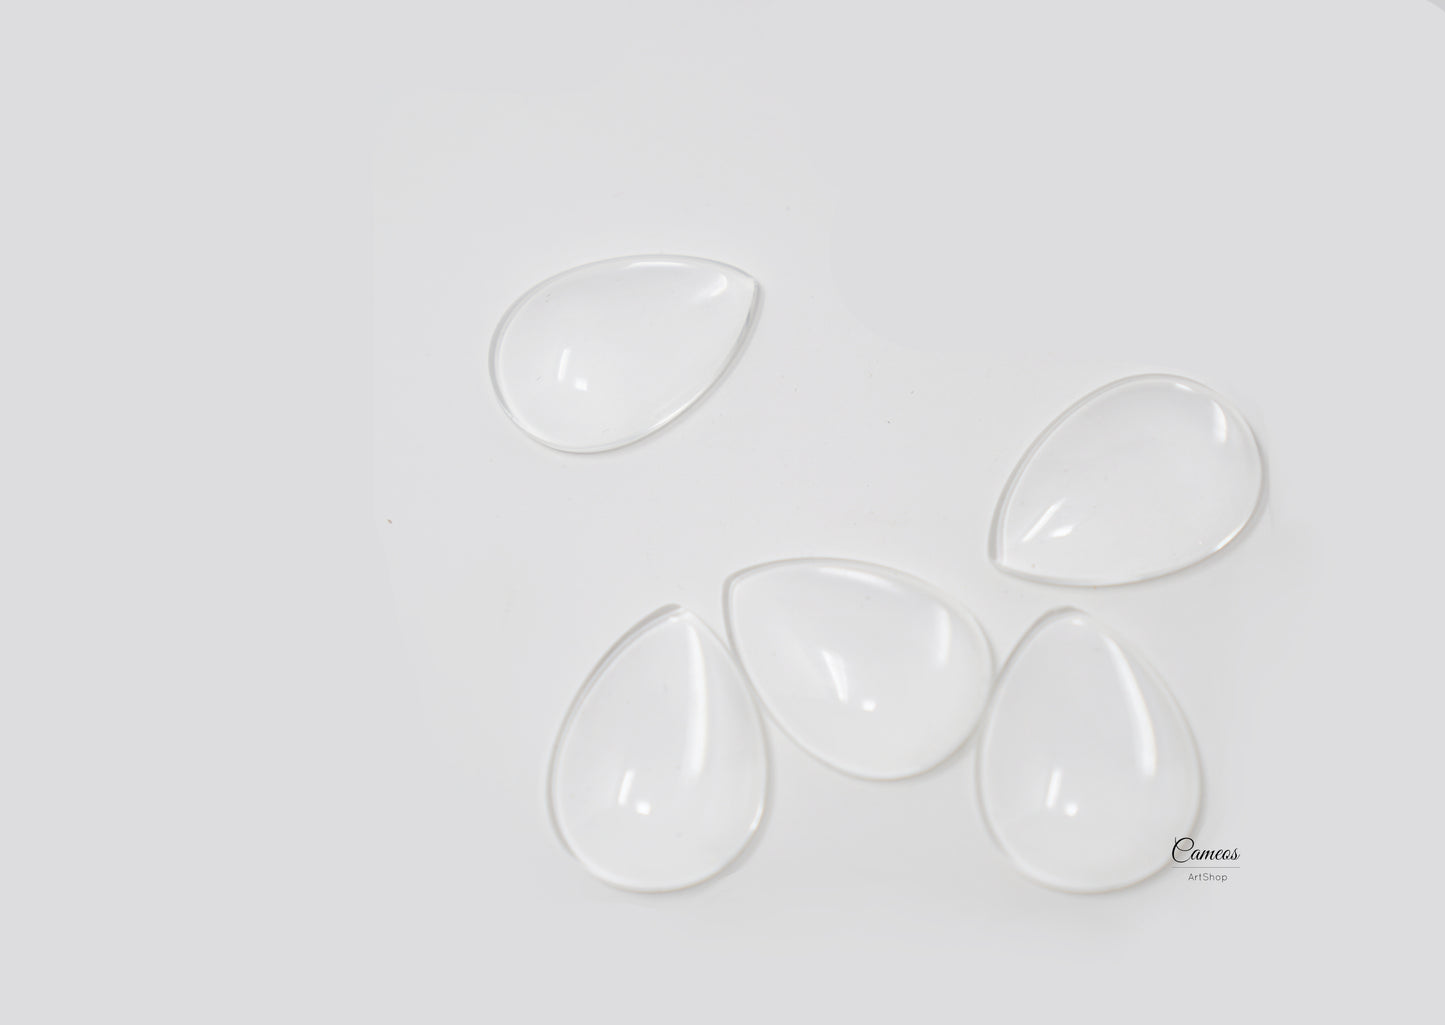 50 pcs Teardrop Shape Clear Glass Cabochons, Transparent Glass Cover, Domed Glass Cabochon 18x25mm